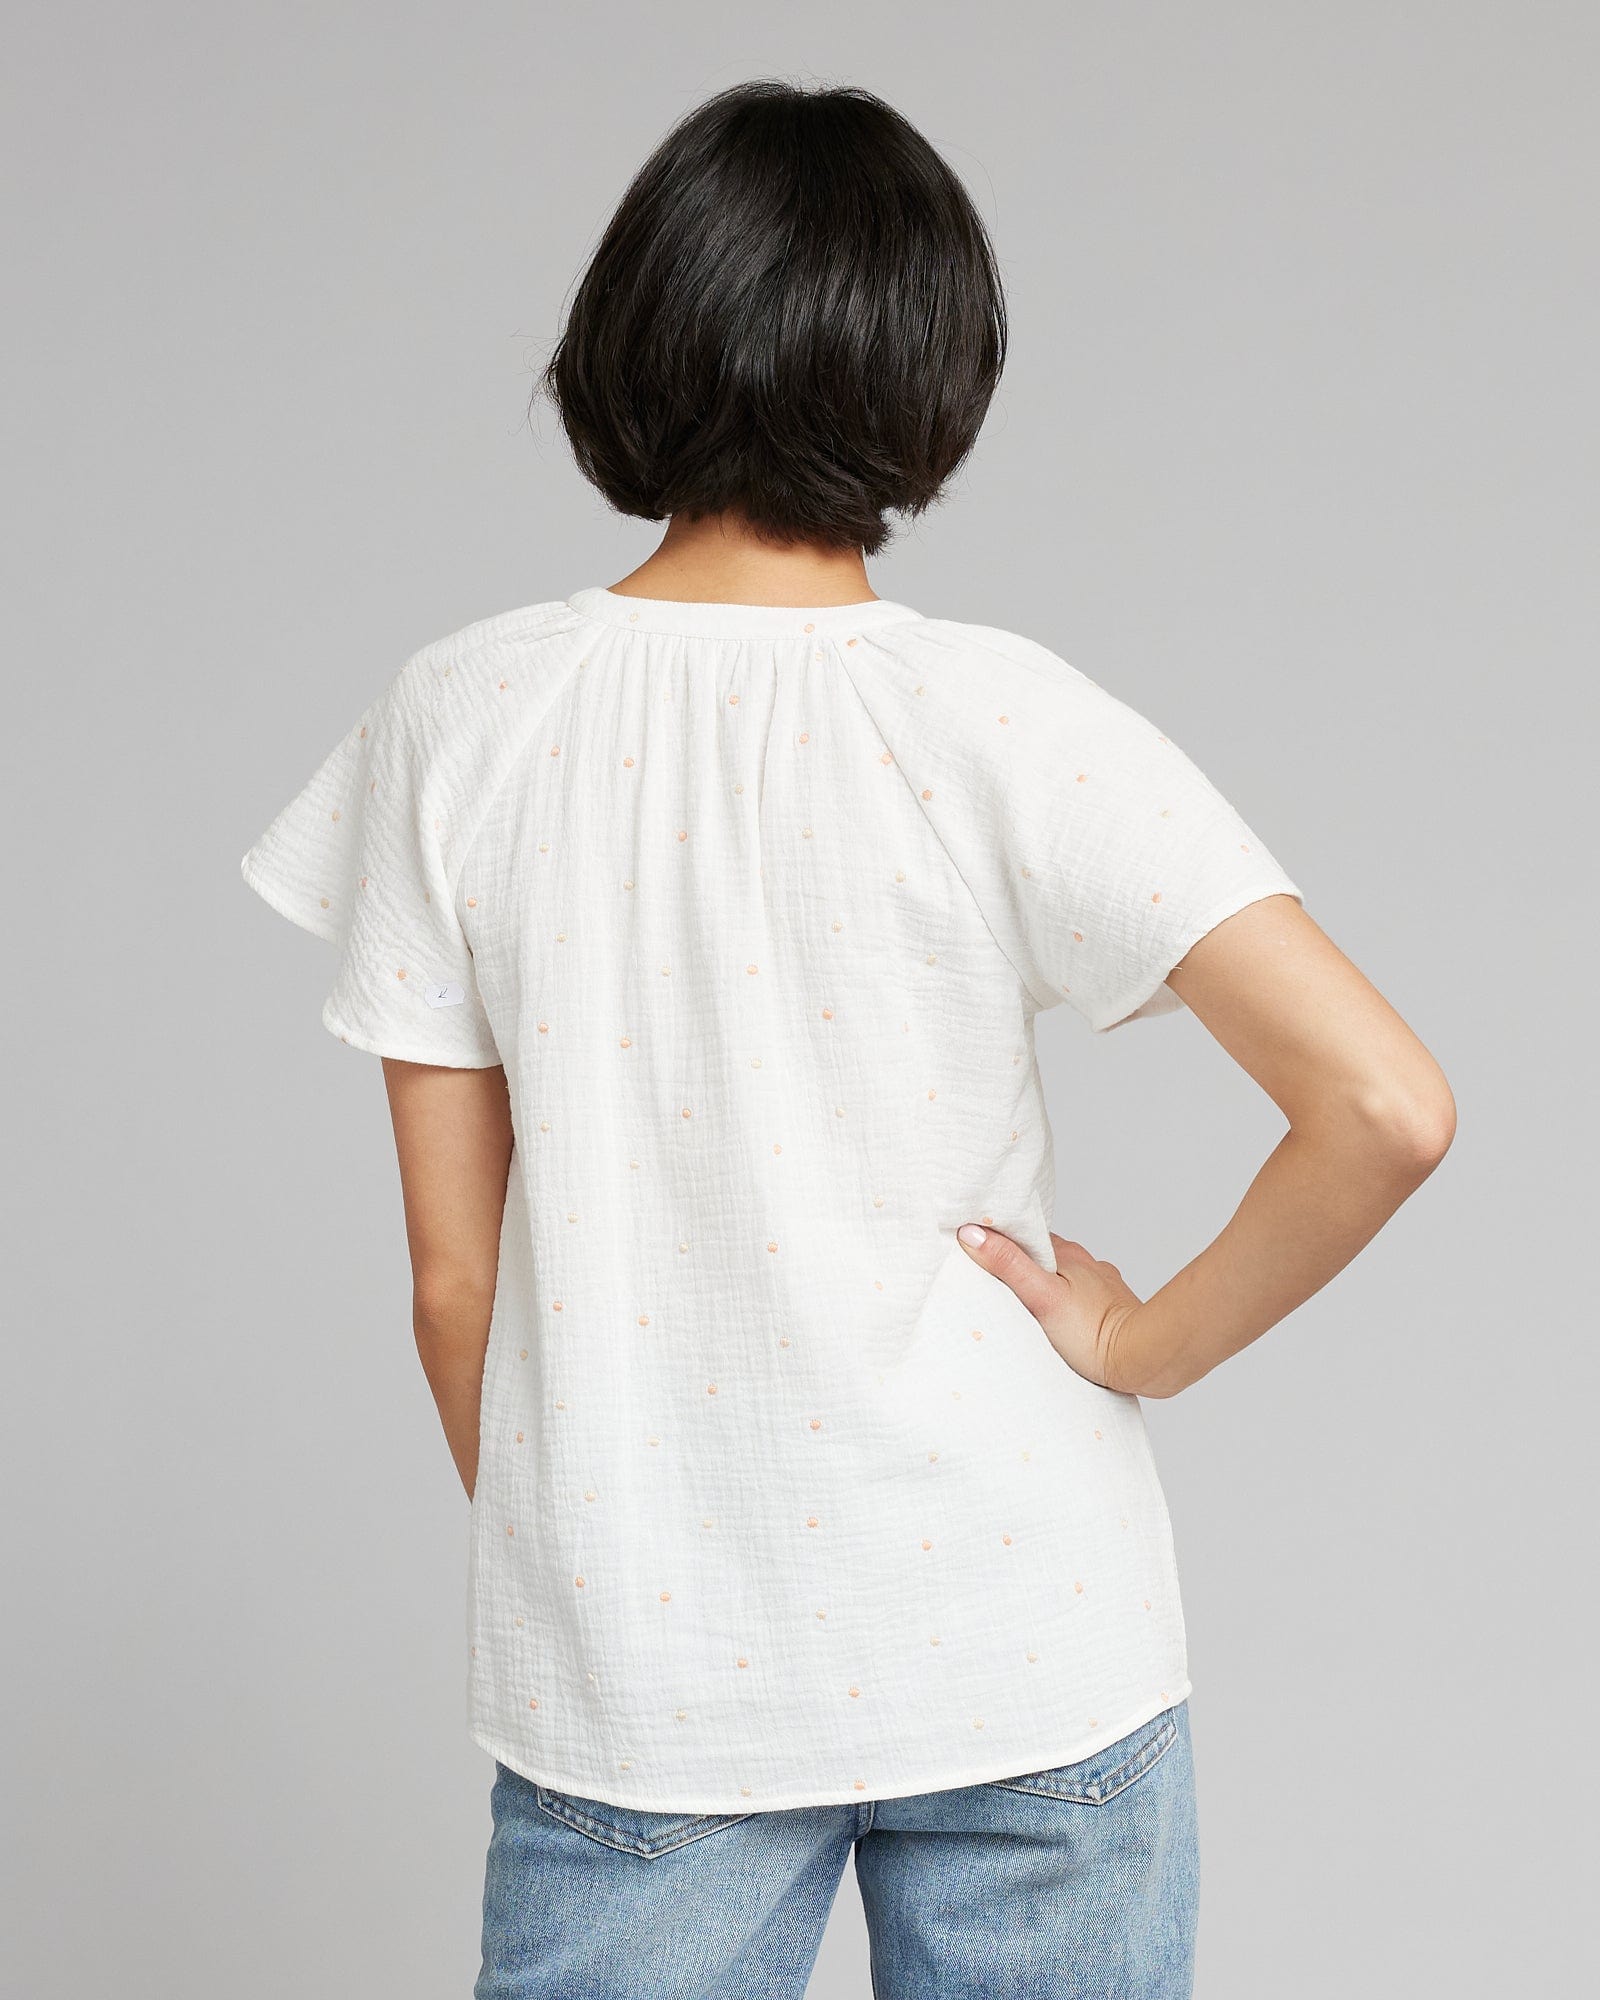 Woman in a short sleeve, v-neck with buttons top